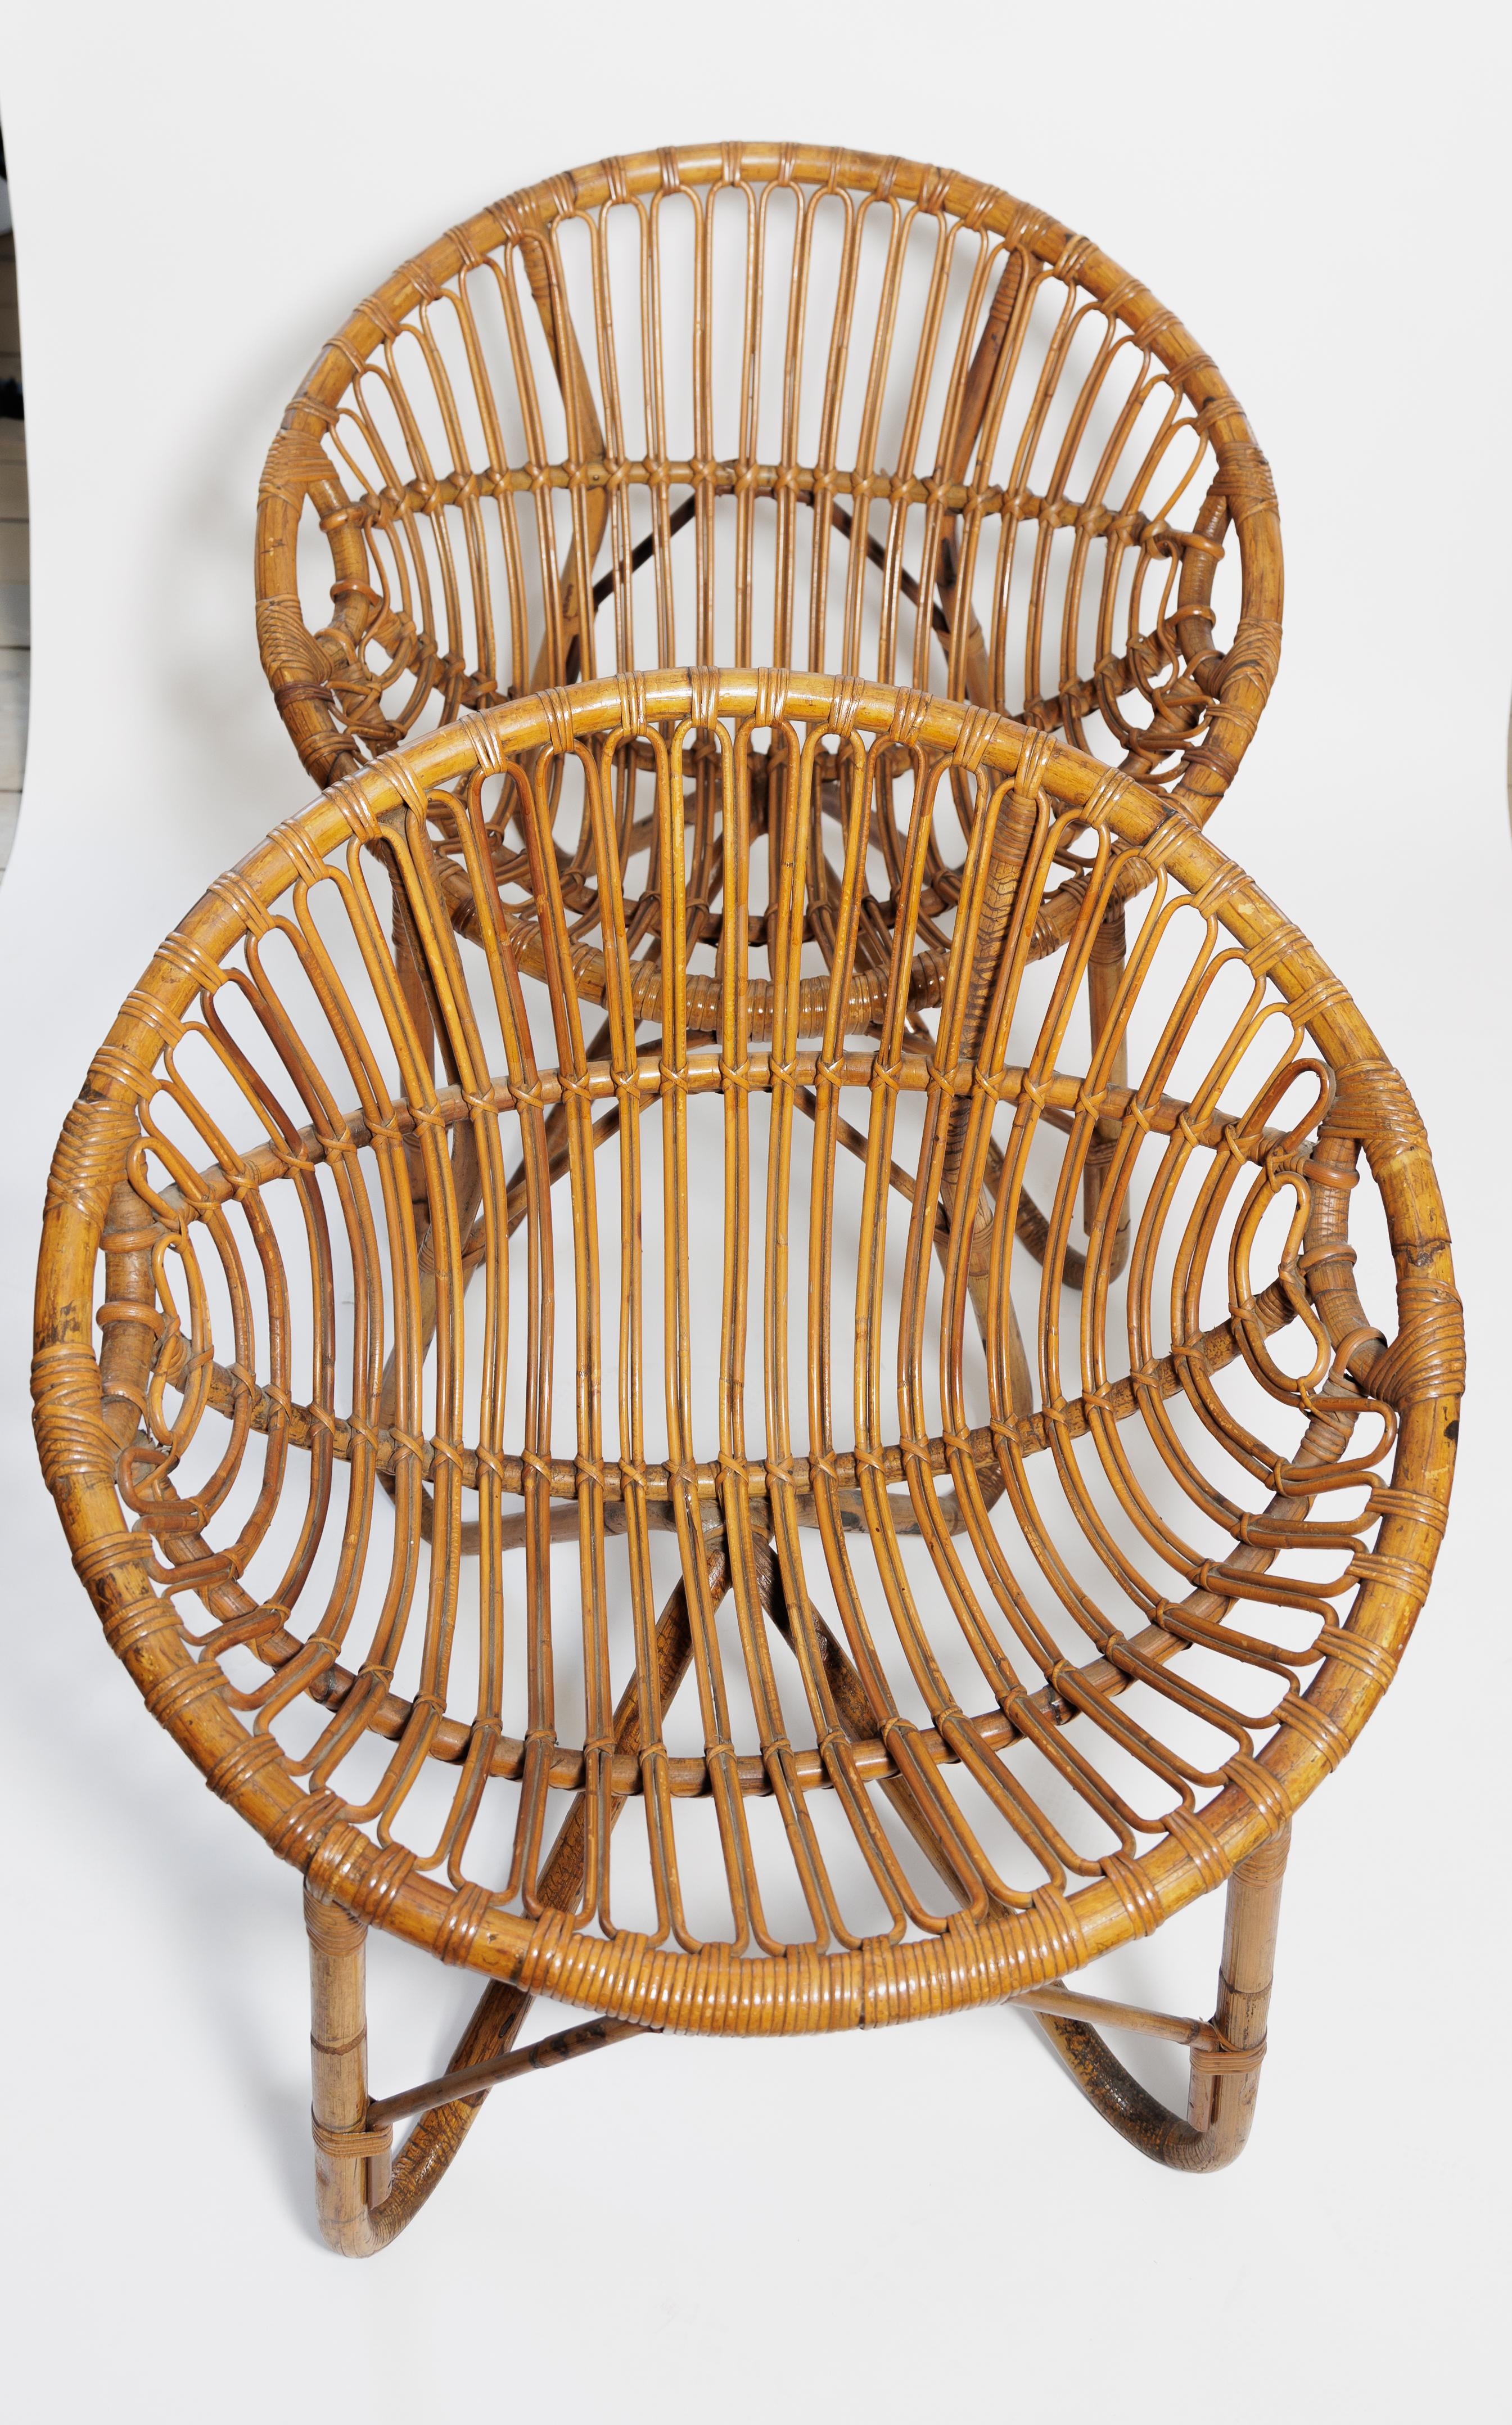 Unique pair of rattan chairs in 